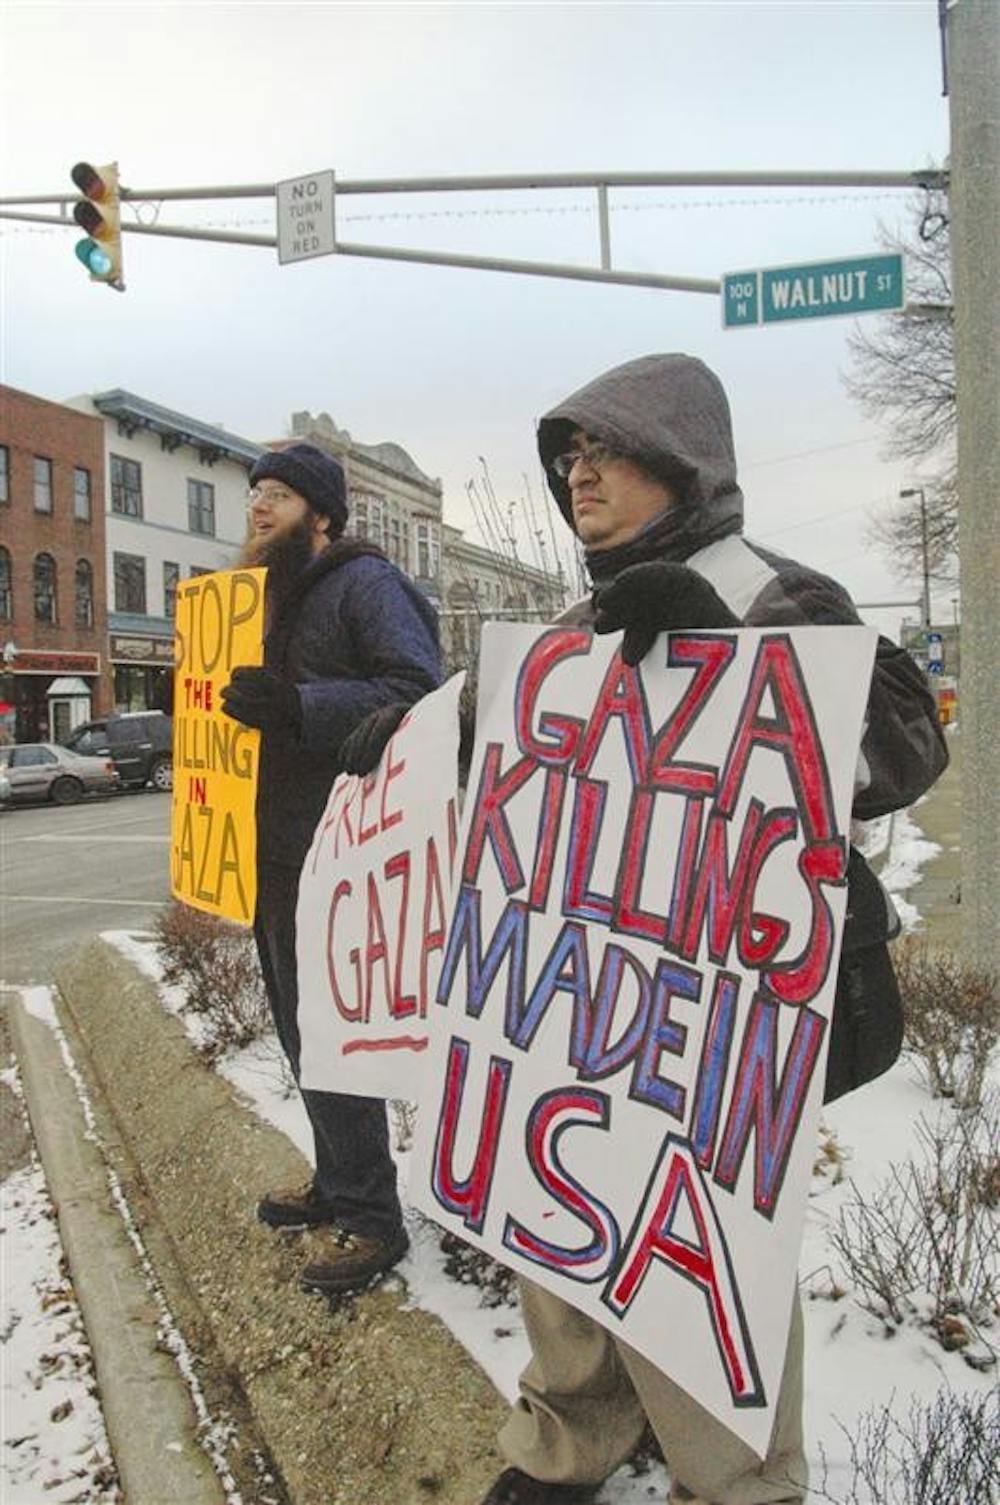 James Cooper (left) and Edward  Vasquez (right), two organizers for a demonstration on the conflict in Gaza, stood at the courthouse.